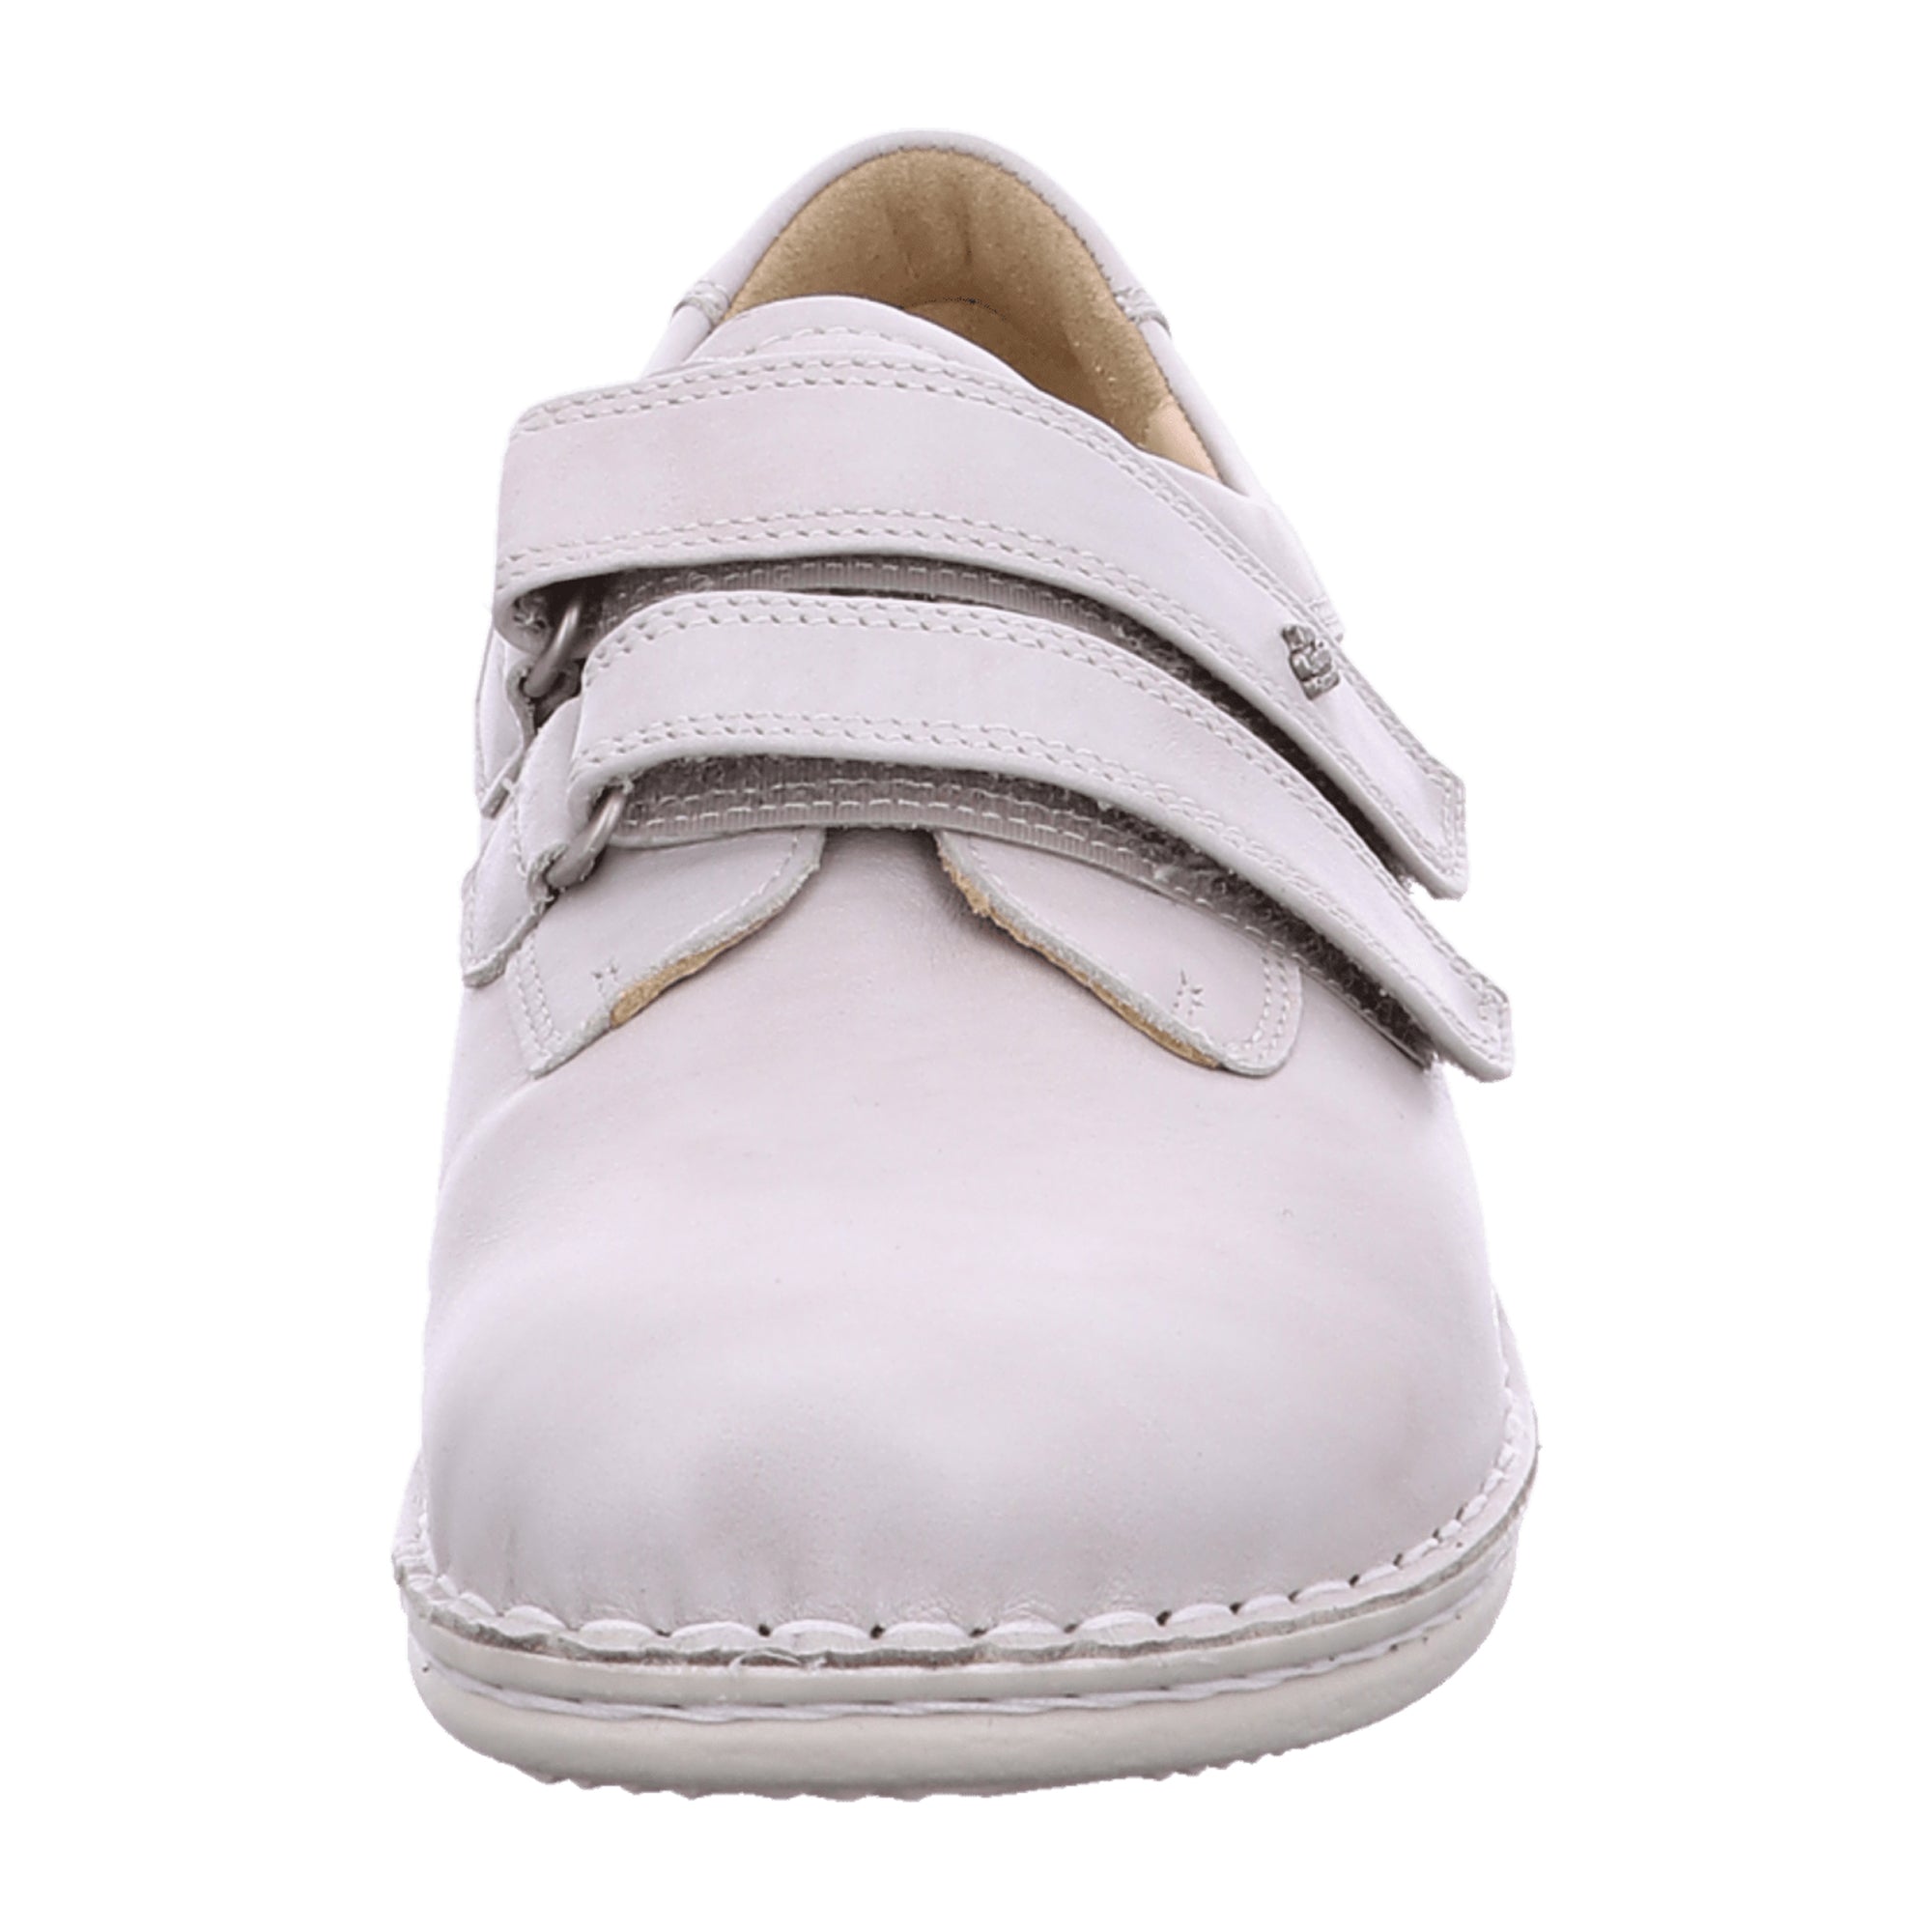 Finn Comfort Ladies' Prophylaxe Orthopedic Shoes, White